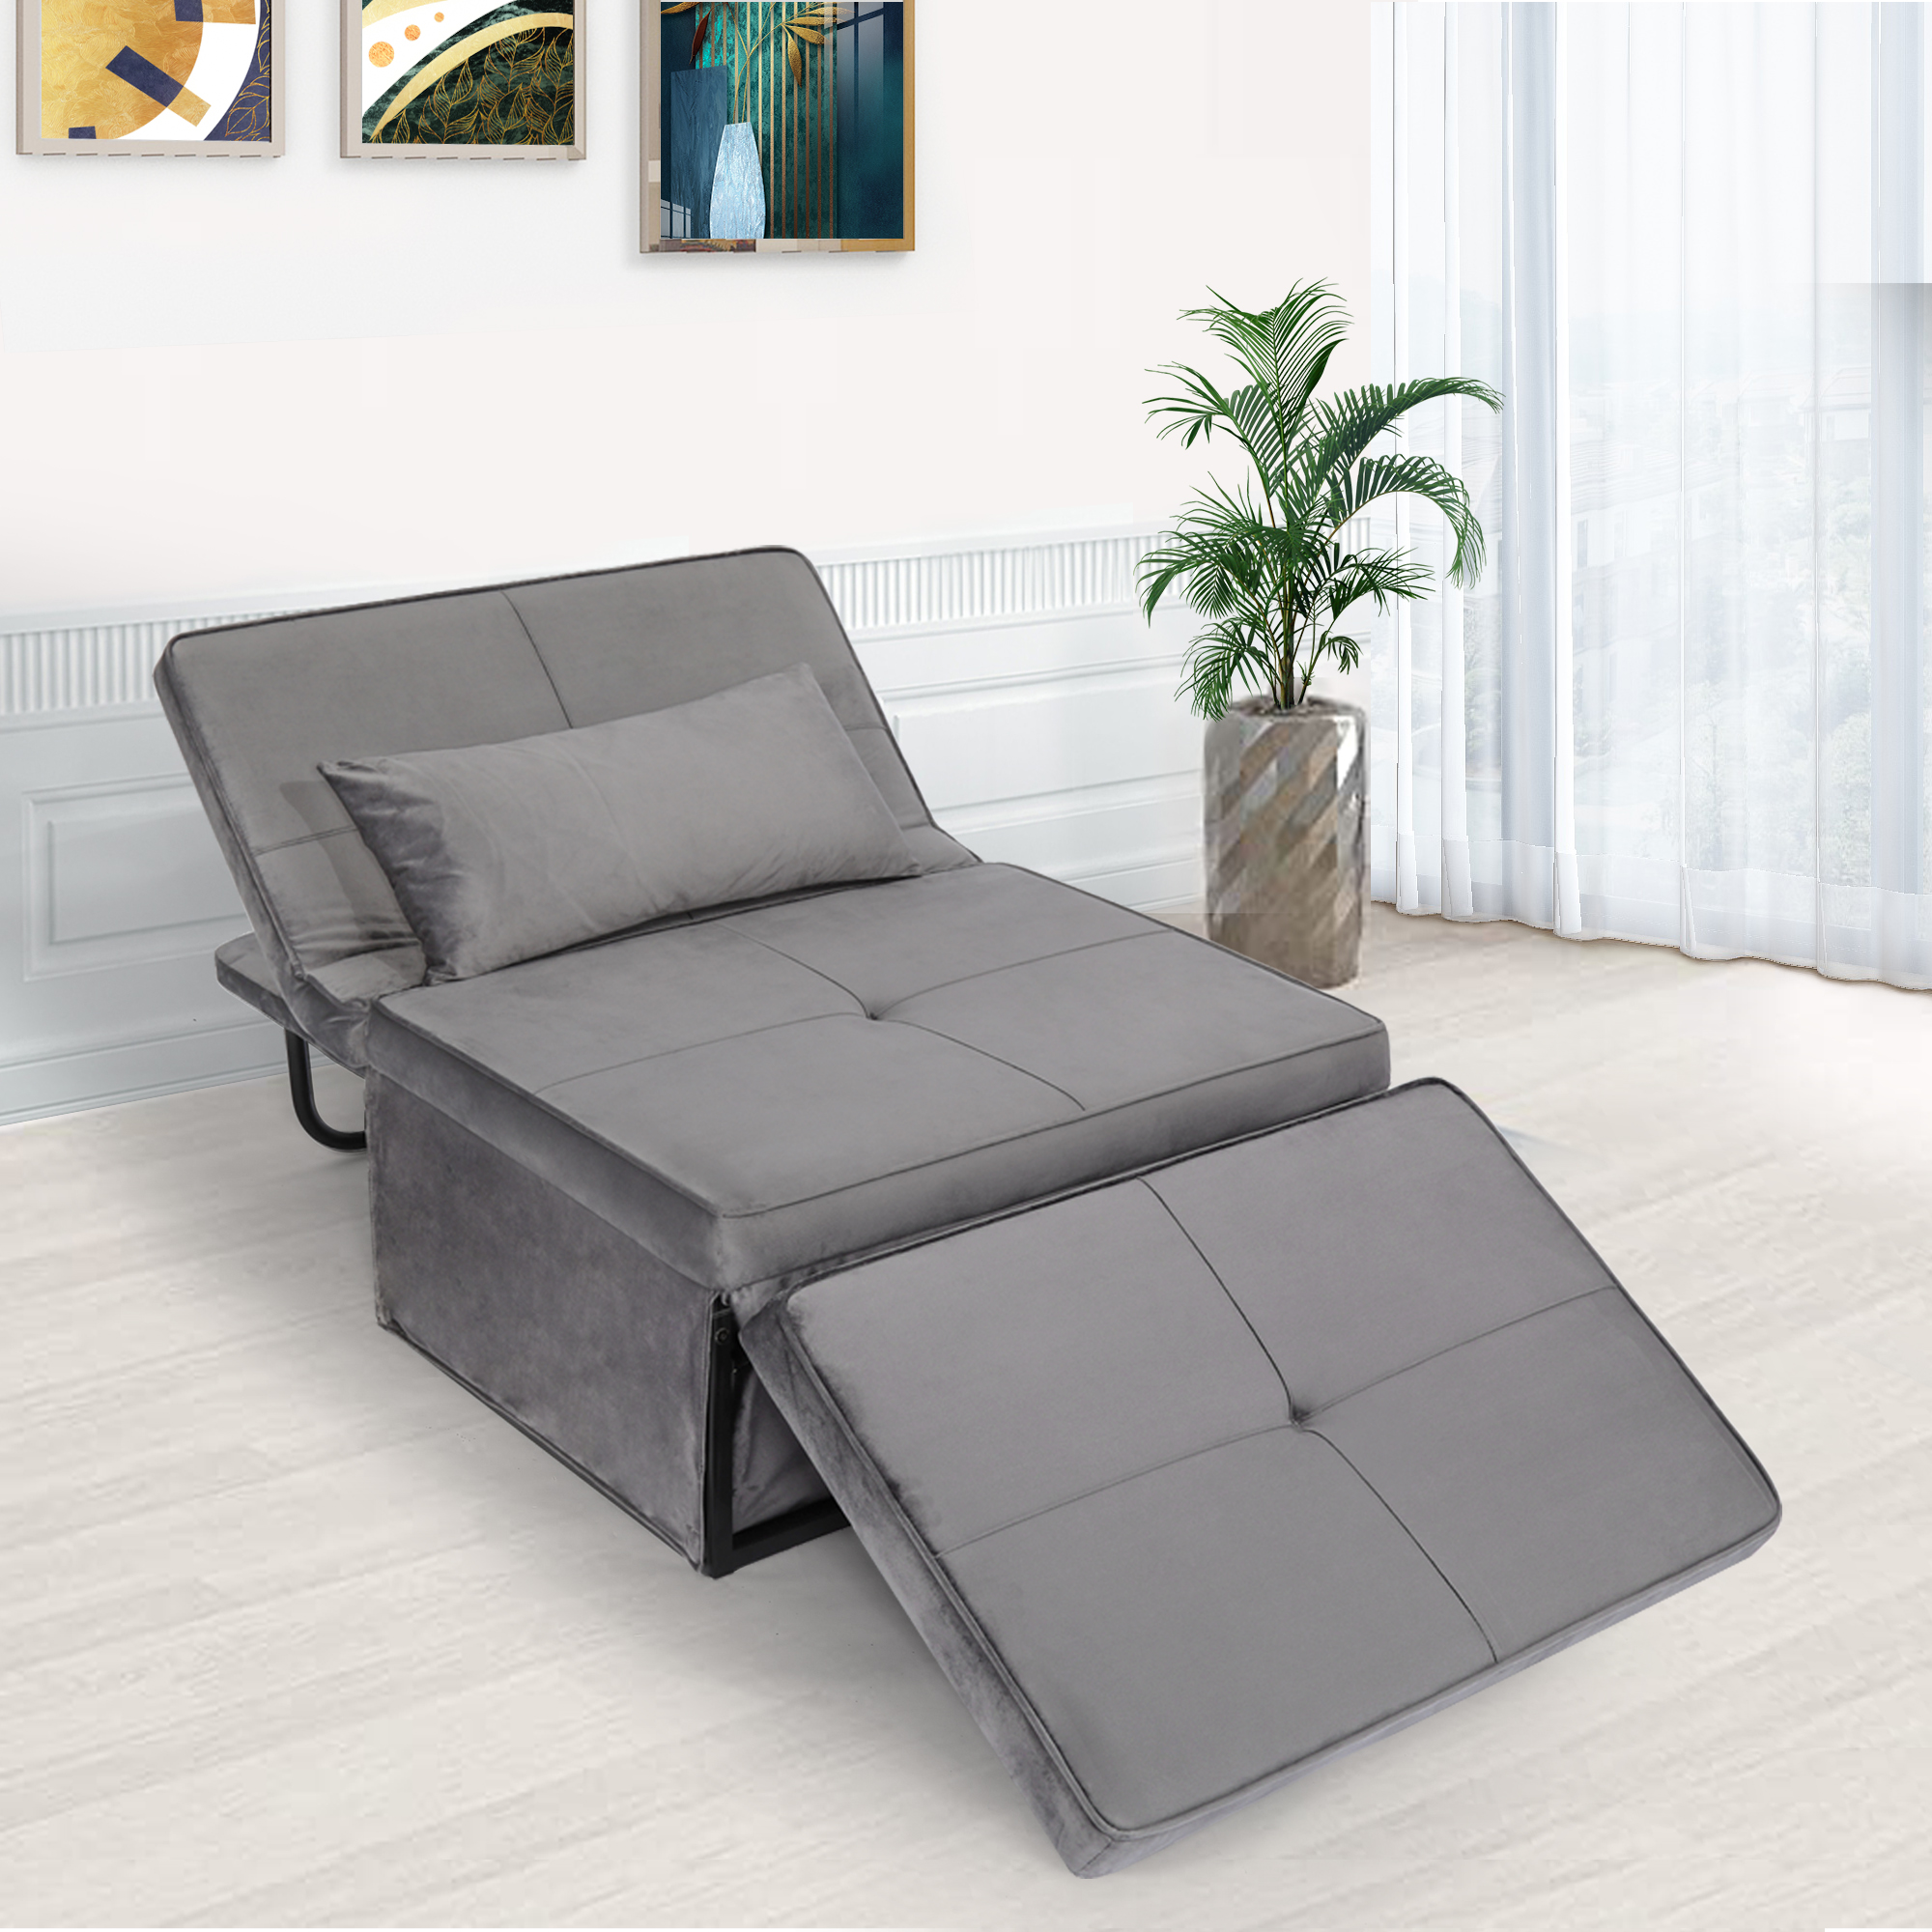 Modern Fabric Sofa Bed Foldable Sofa Ottoman Chair for Home Office Use